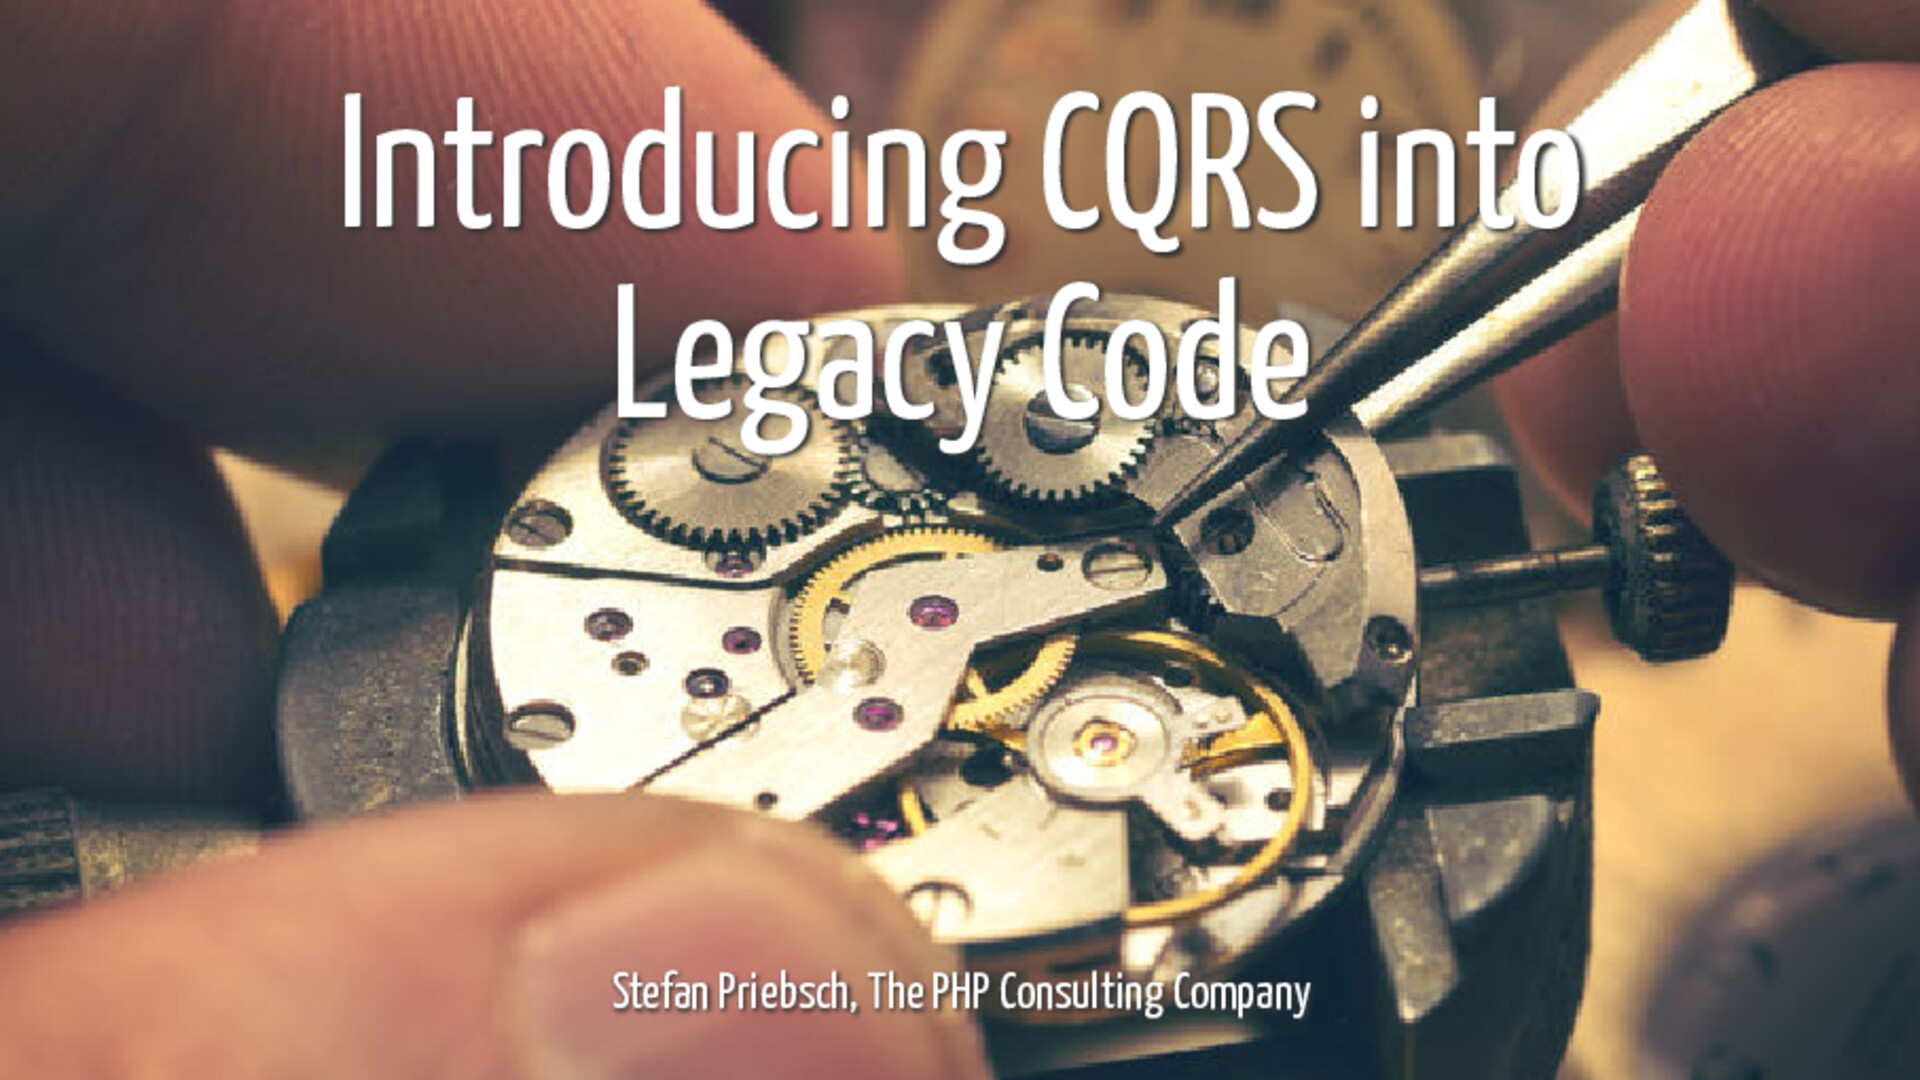 Introducing CQRS into Legacy Code